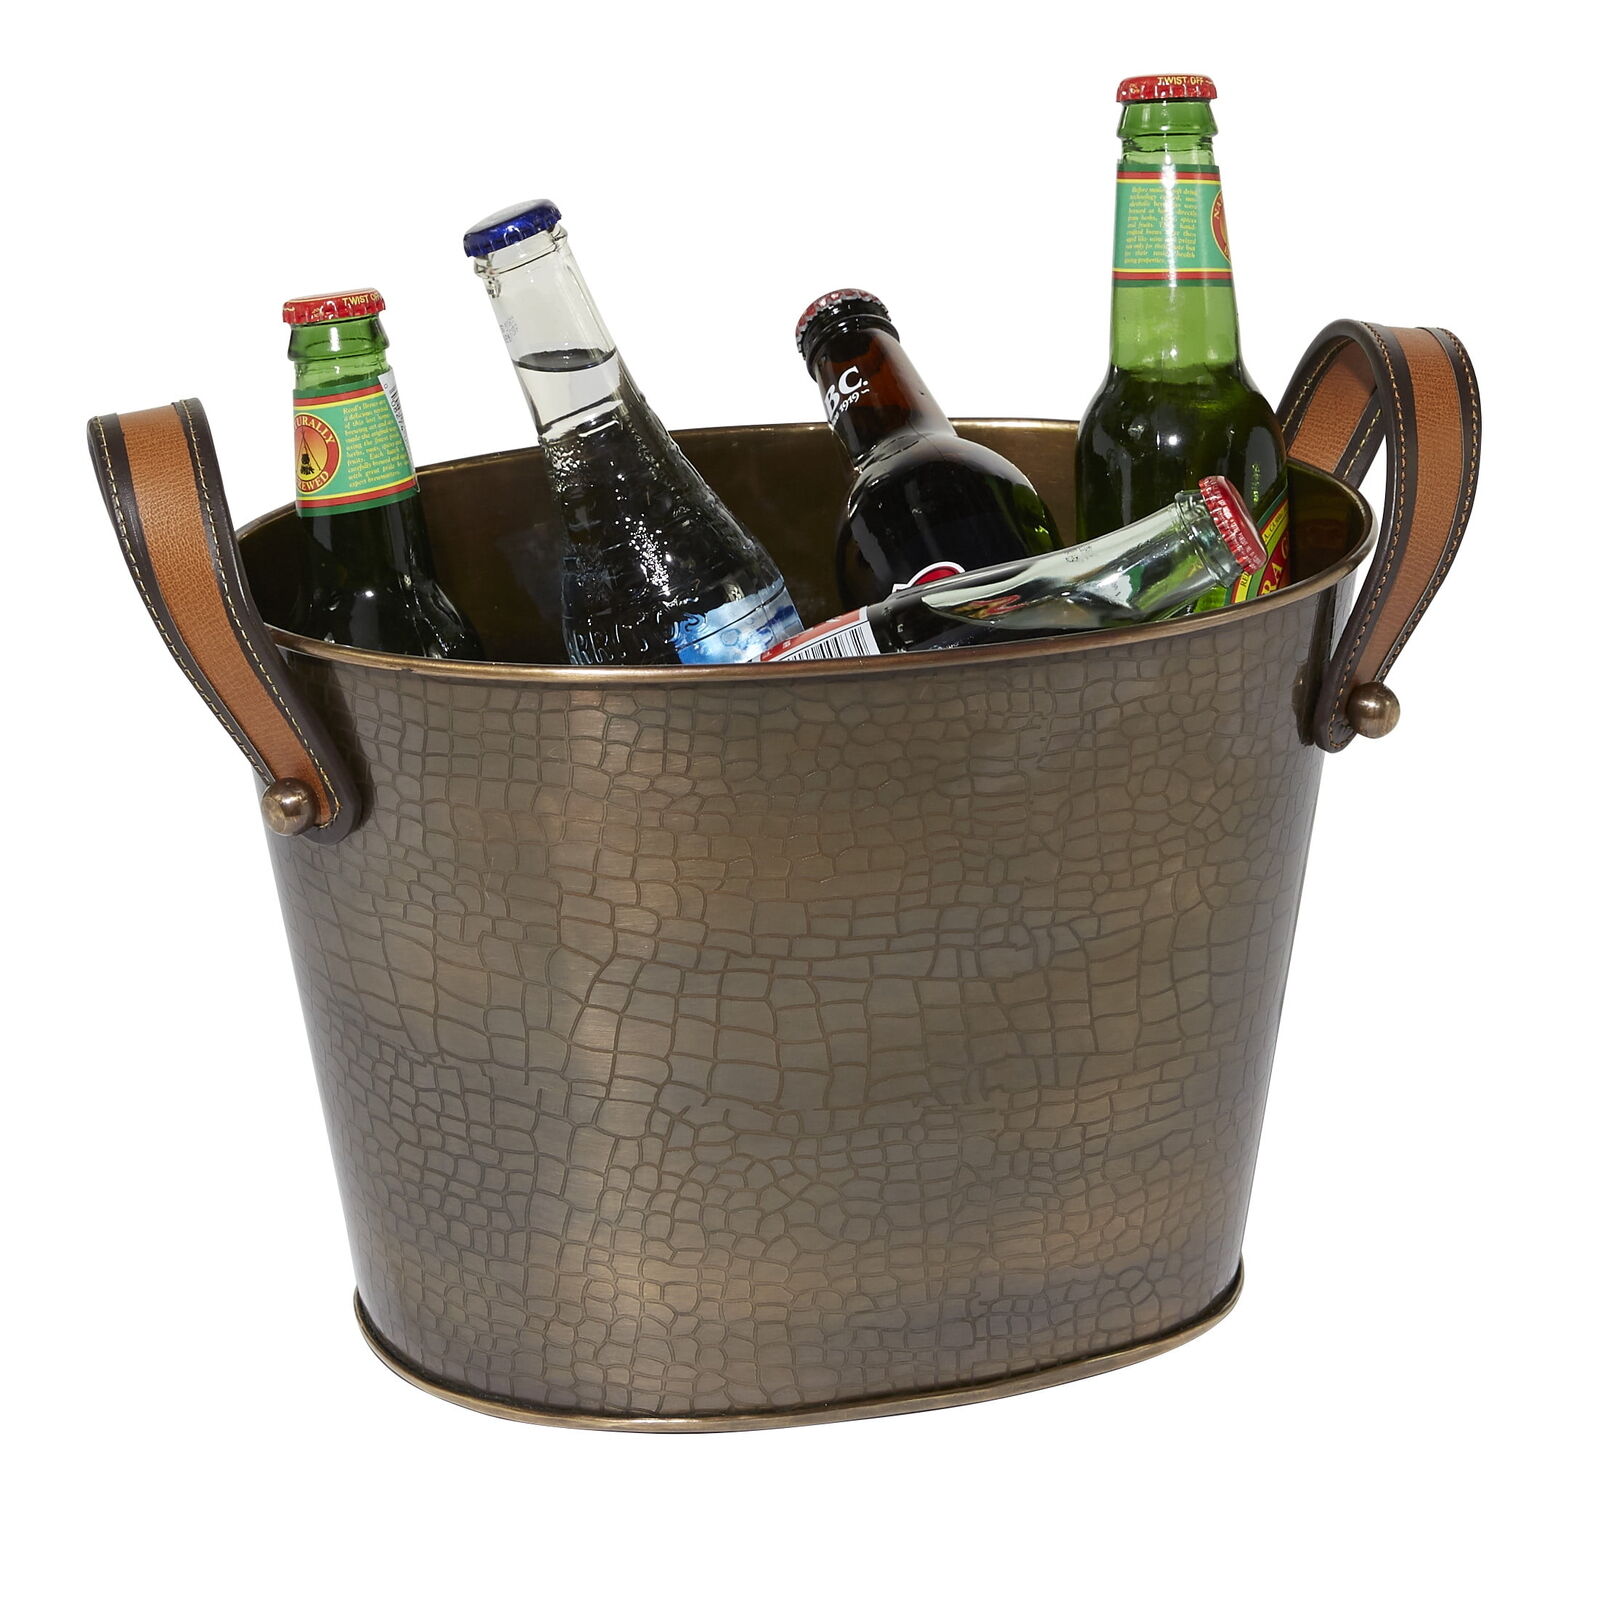 DecMode Oval Metal 6 Bottles Bronze Ice Bucket with Leather Strap Handles